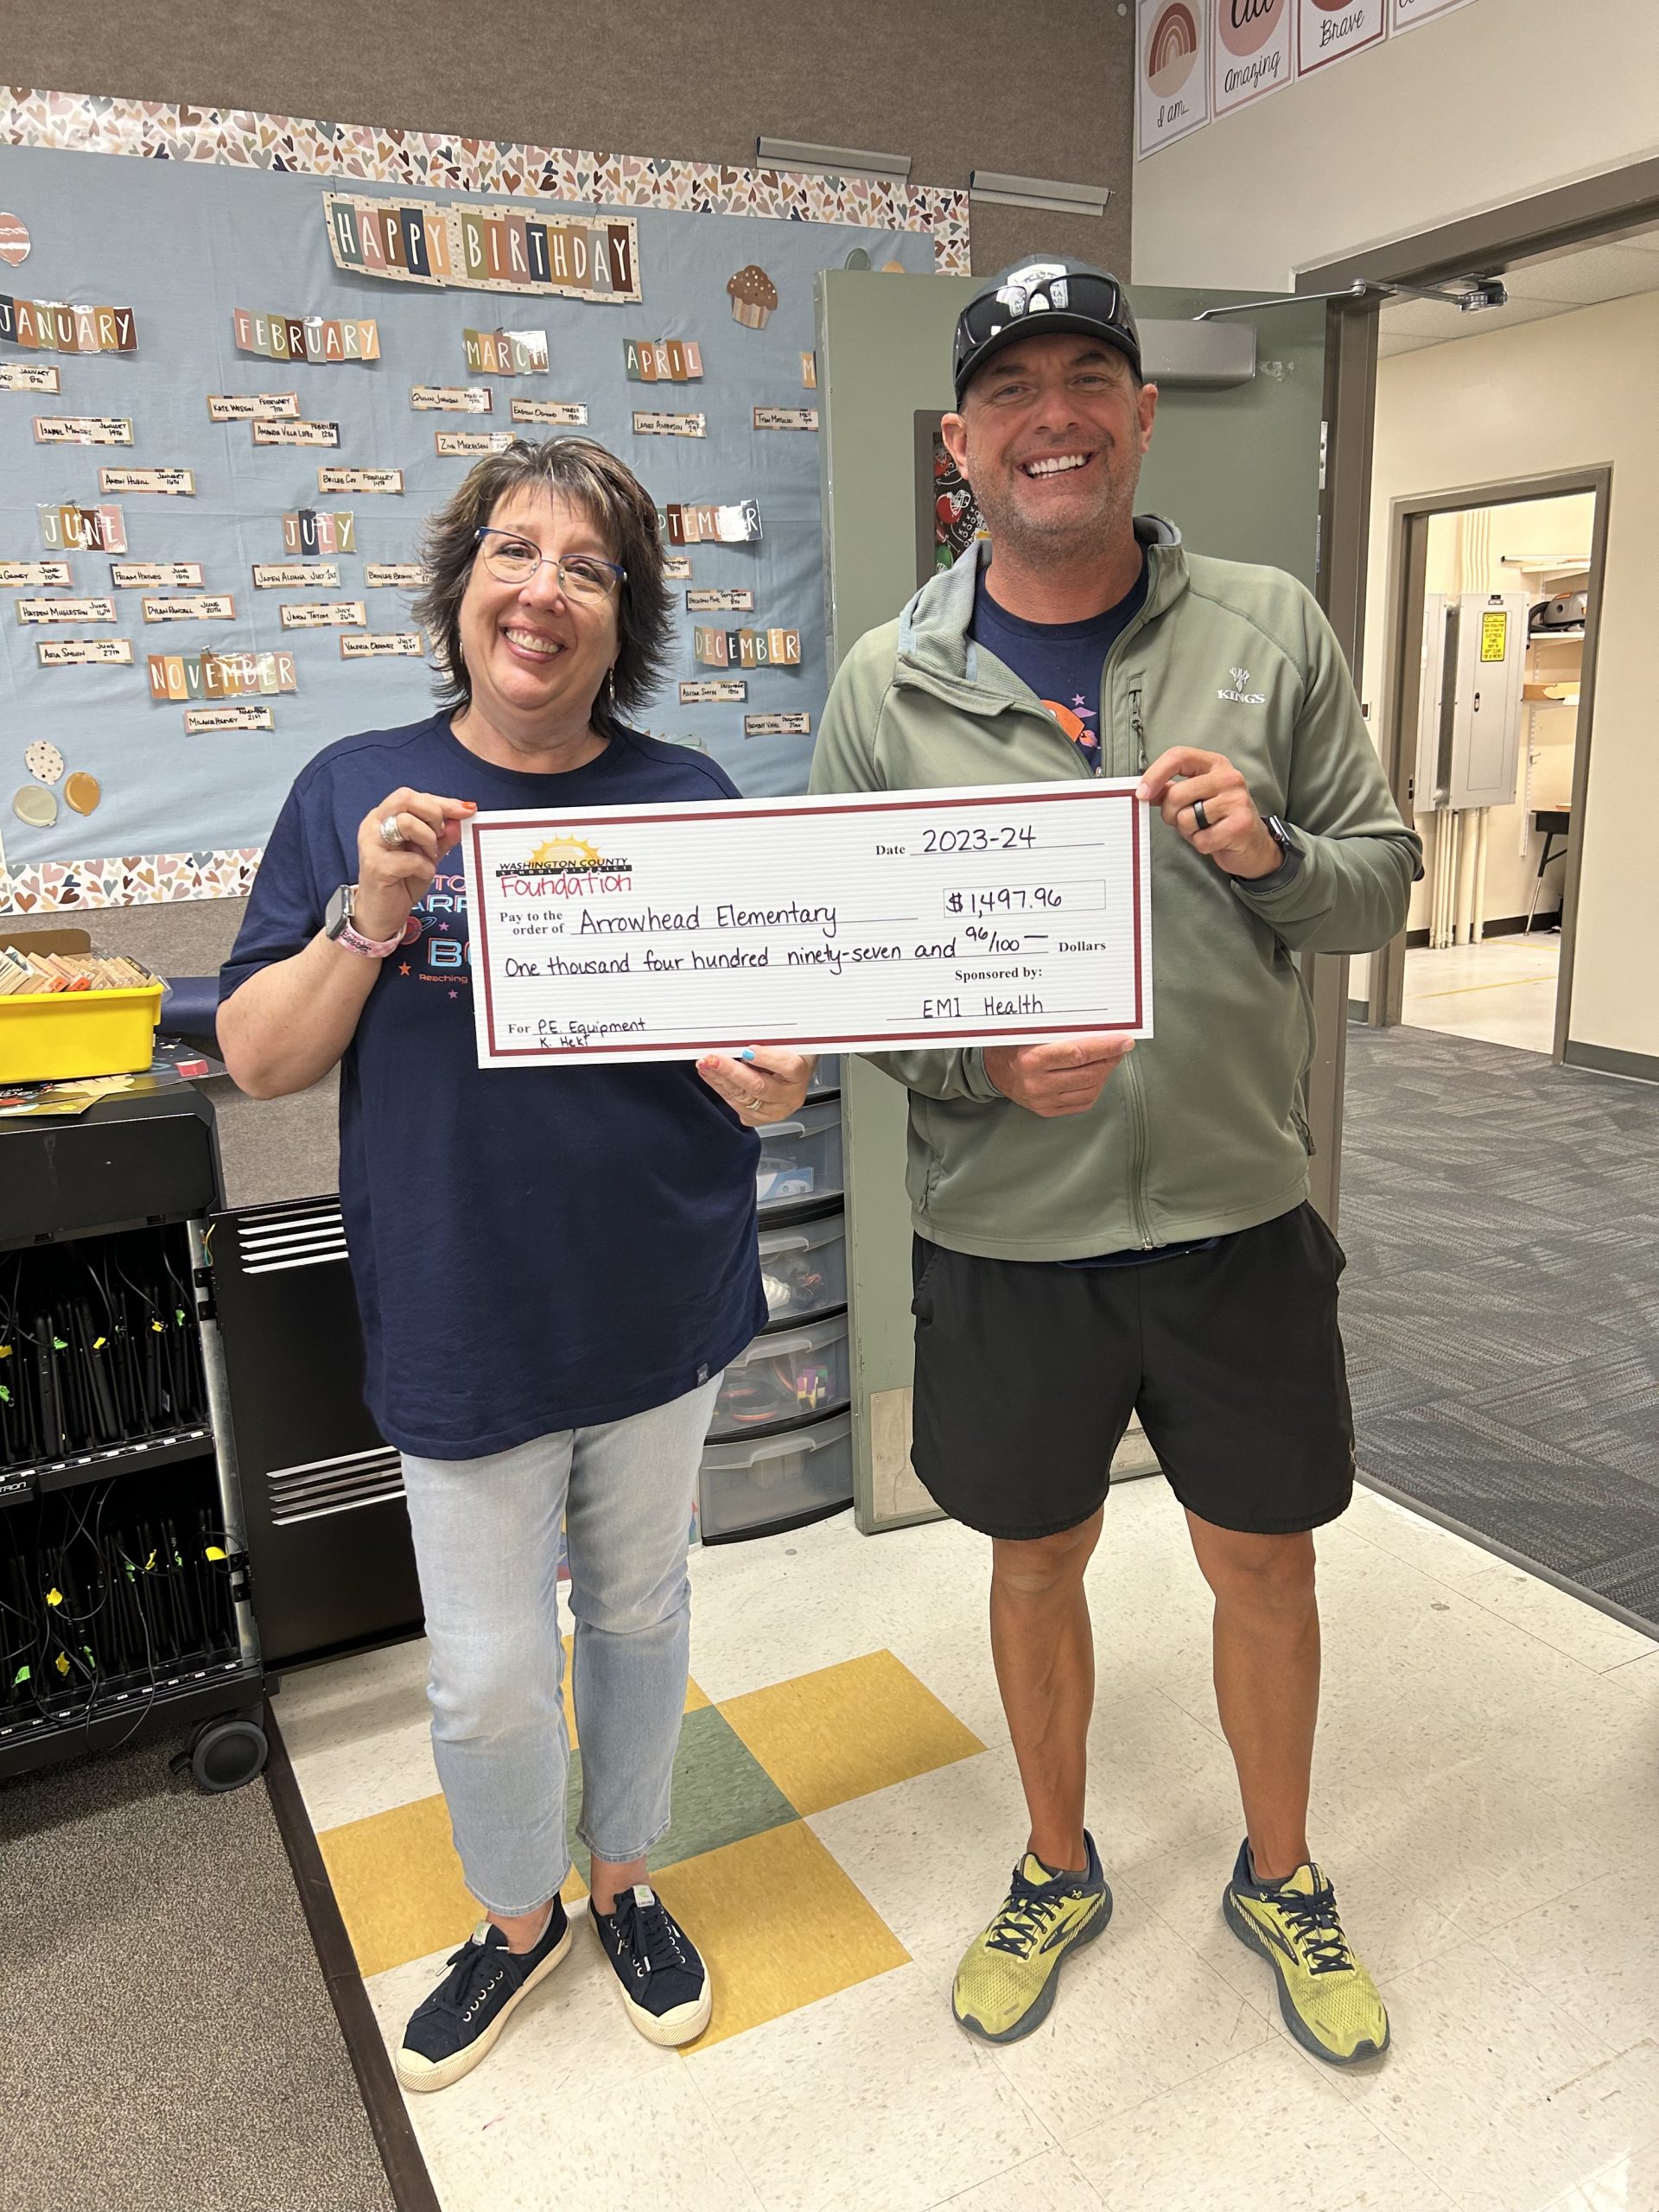 Coach Cather and Mrs. Heki received a Foundation Grant for the 2023-24 school year. Thank you, EMI Health, for the new PE equipment.